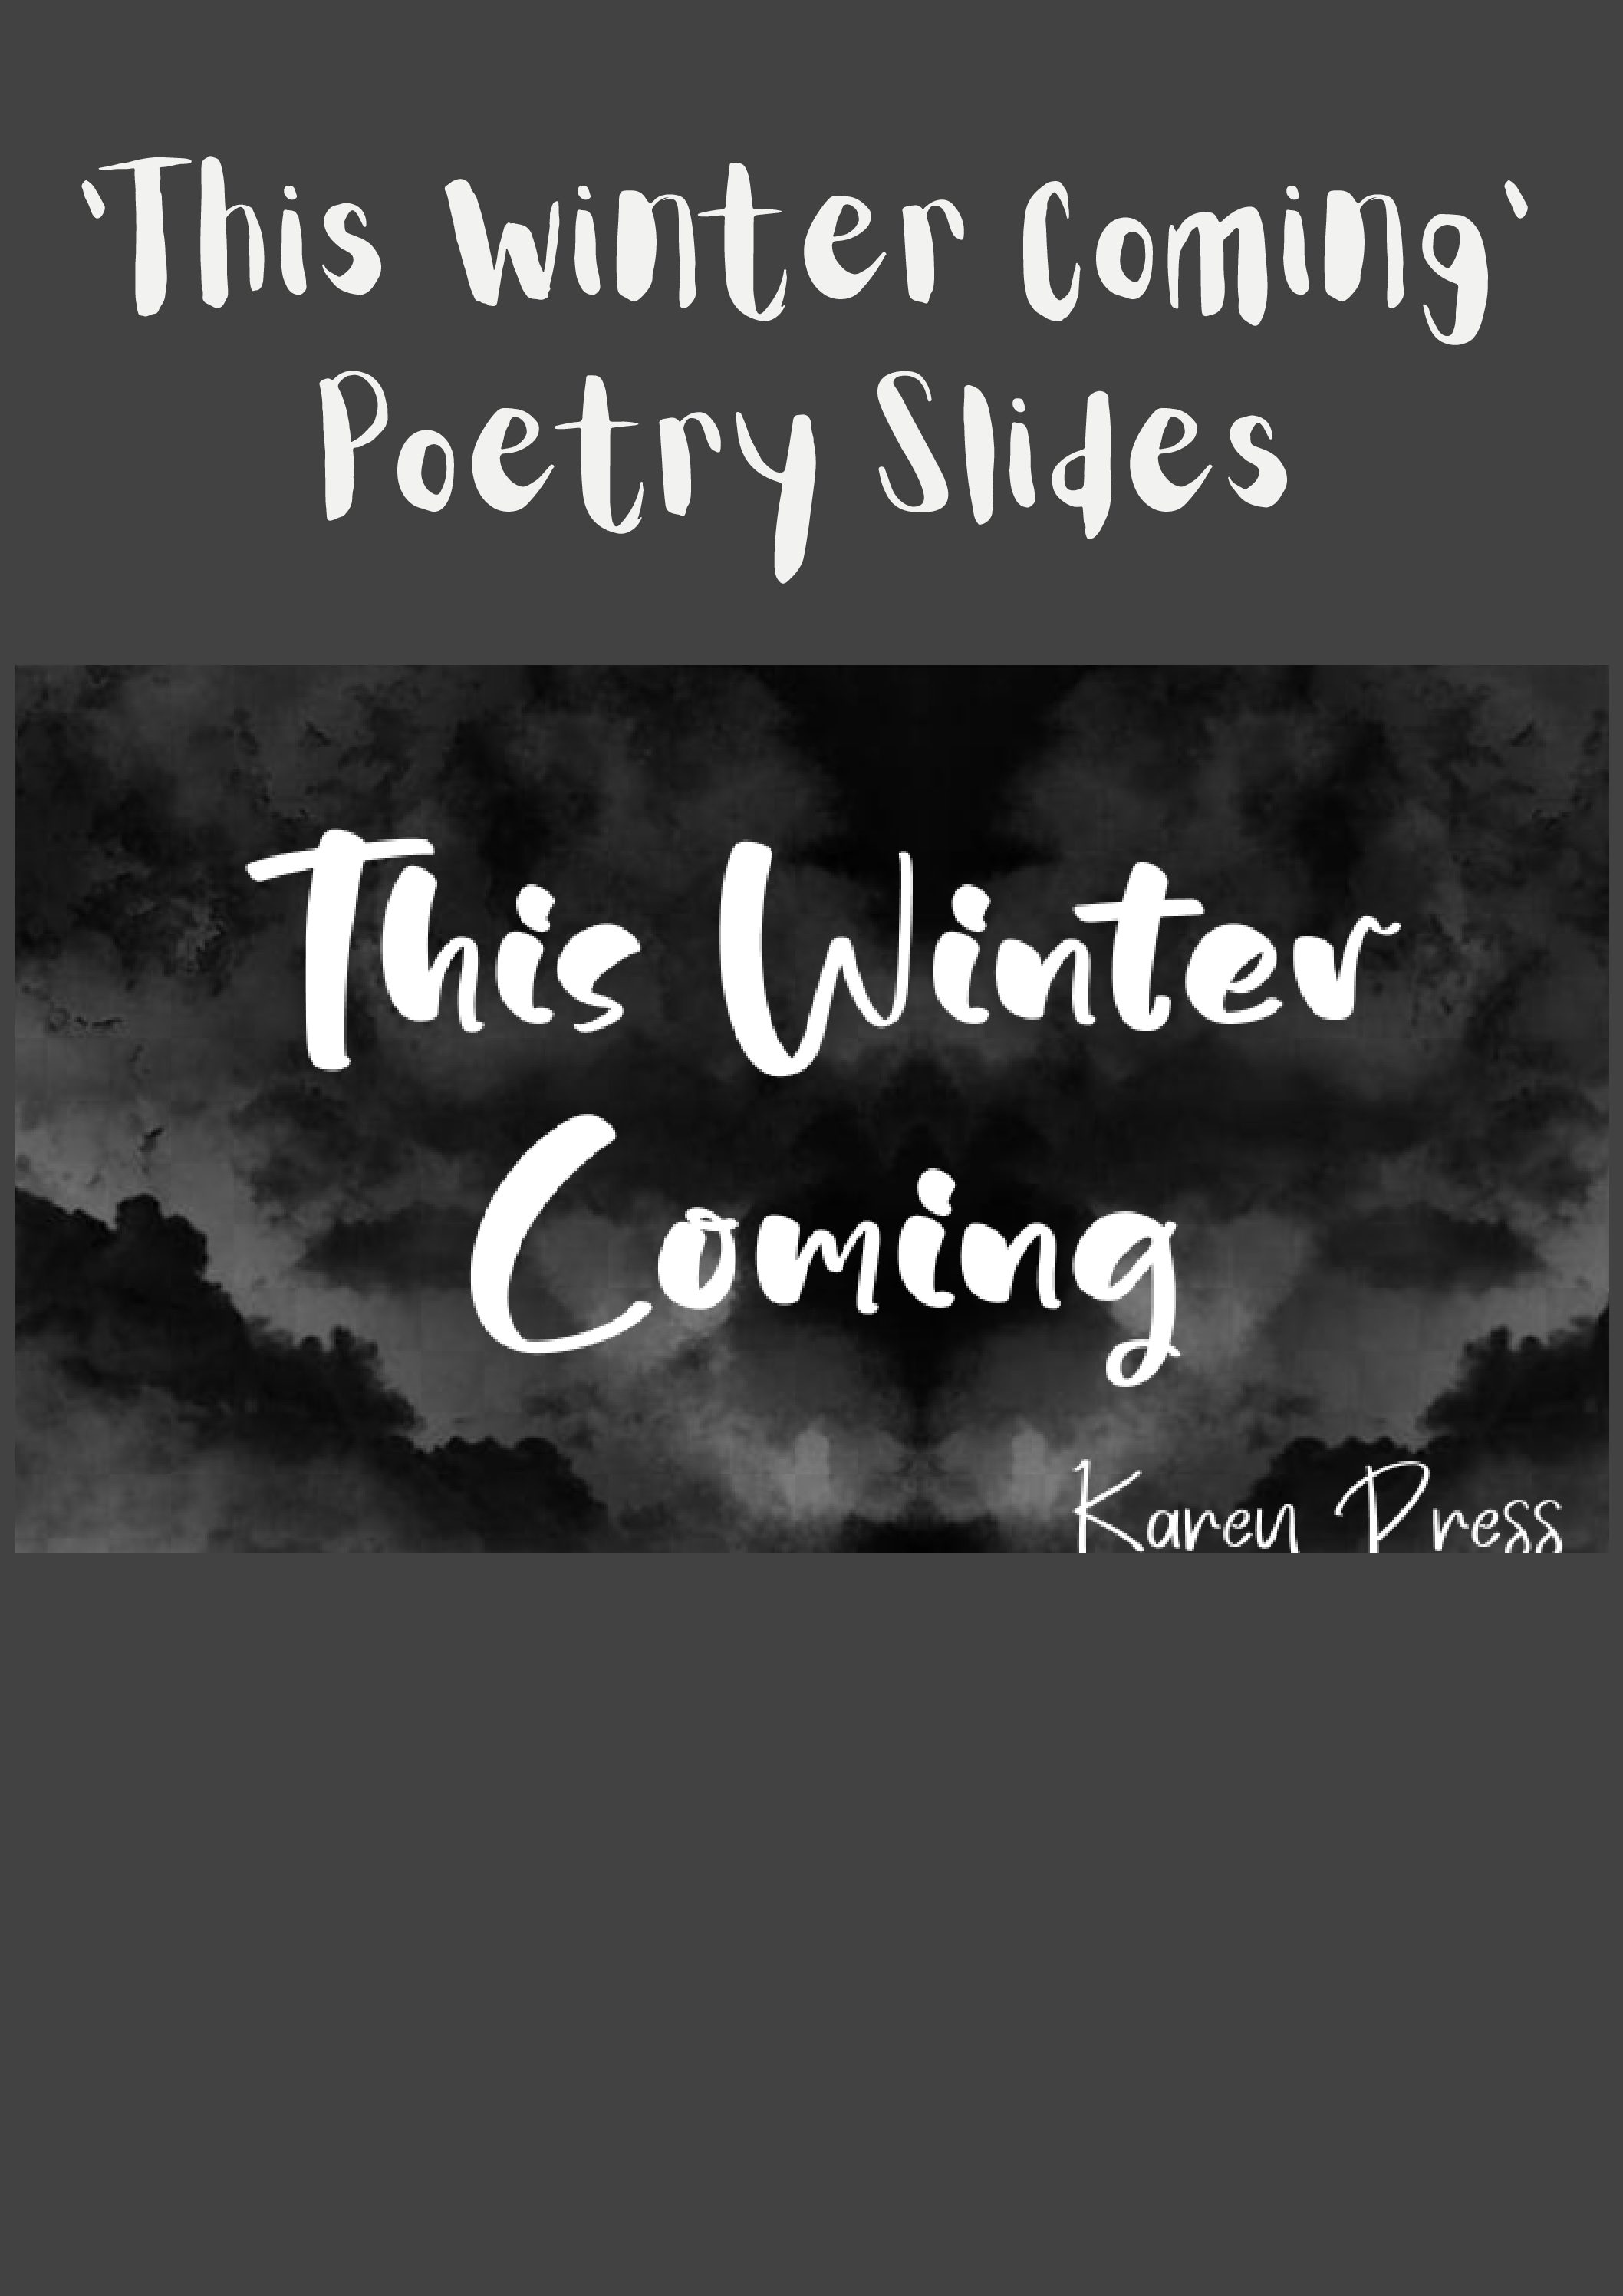 poetry essay this winter coming